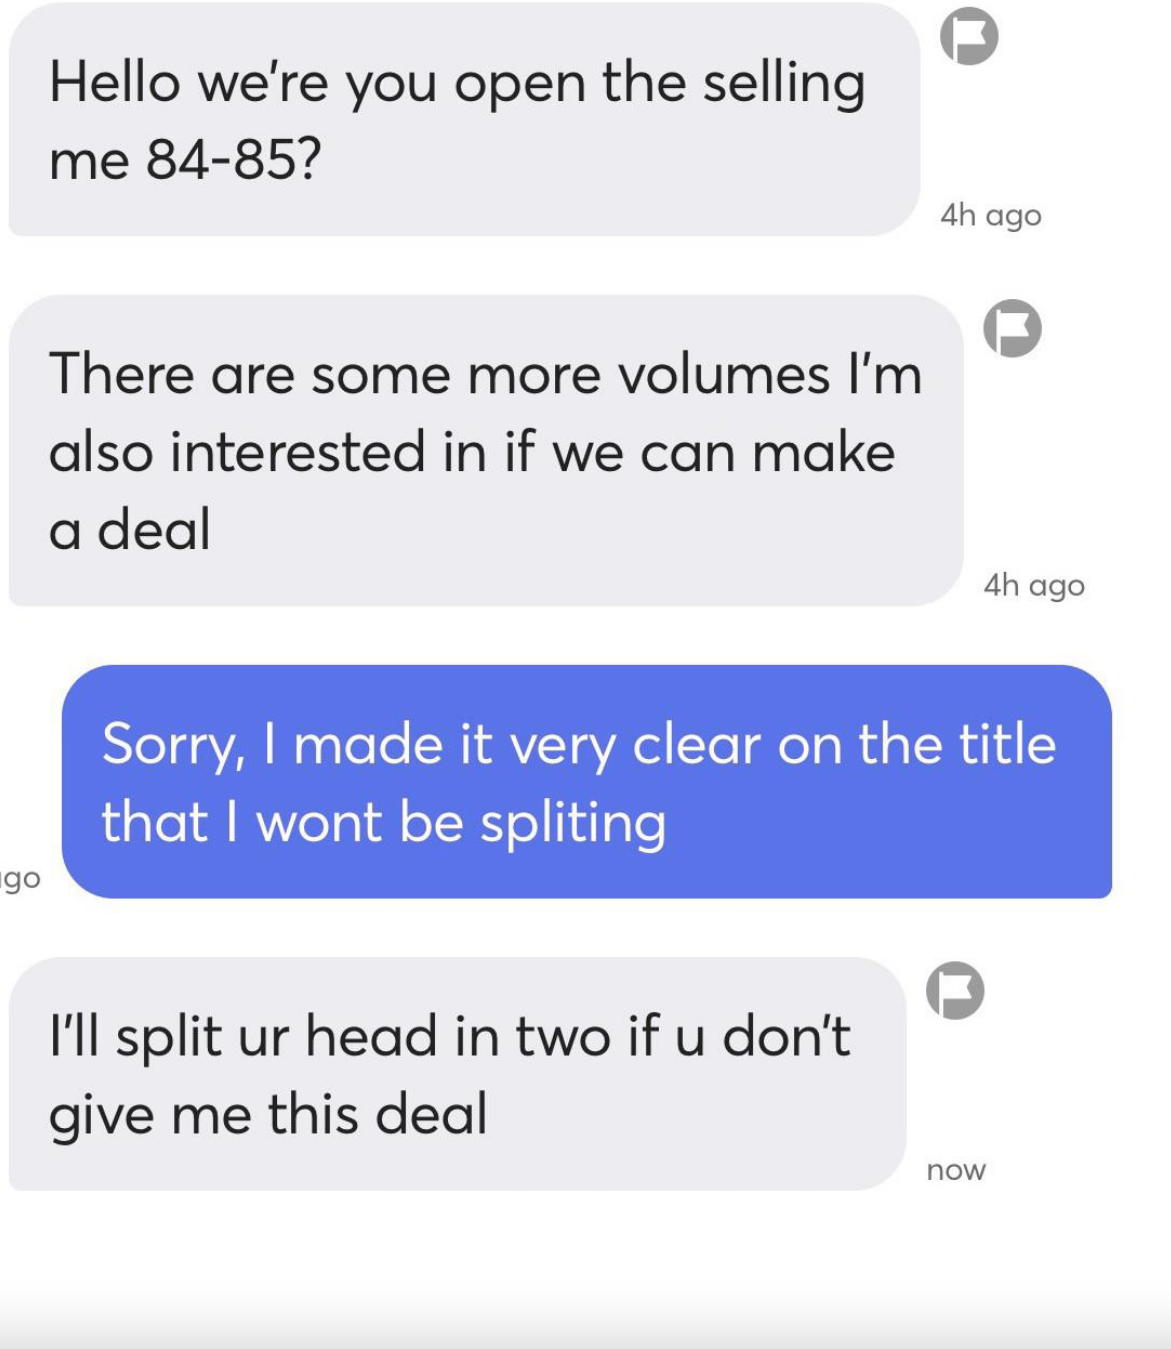 Seller says they made it clear on the title that they won&#x27;t be splitting, and person says &quot;I&#x27;ll split ur head in two if u don&#x27;t give me this deal&quot;